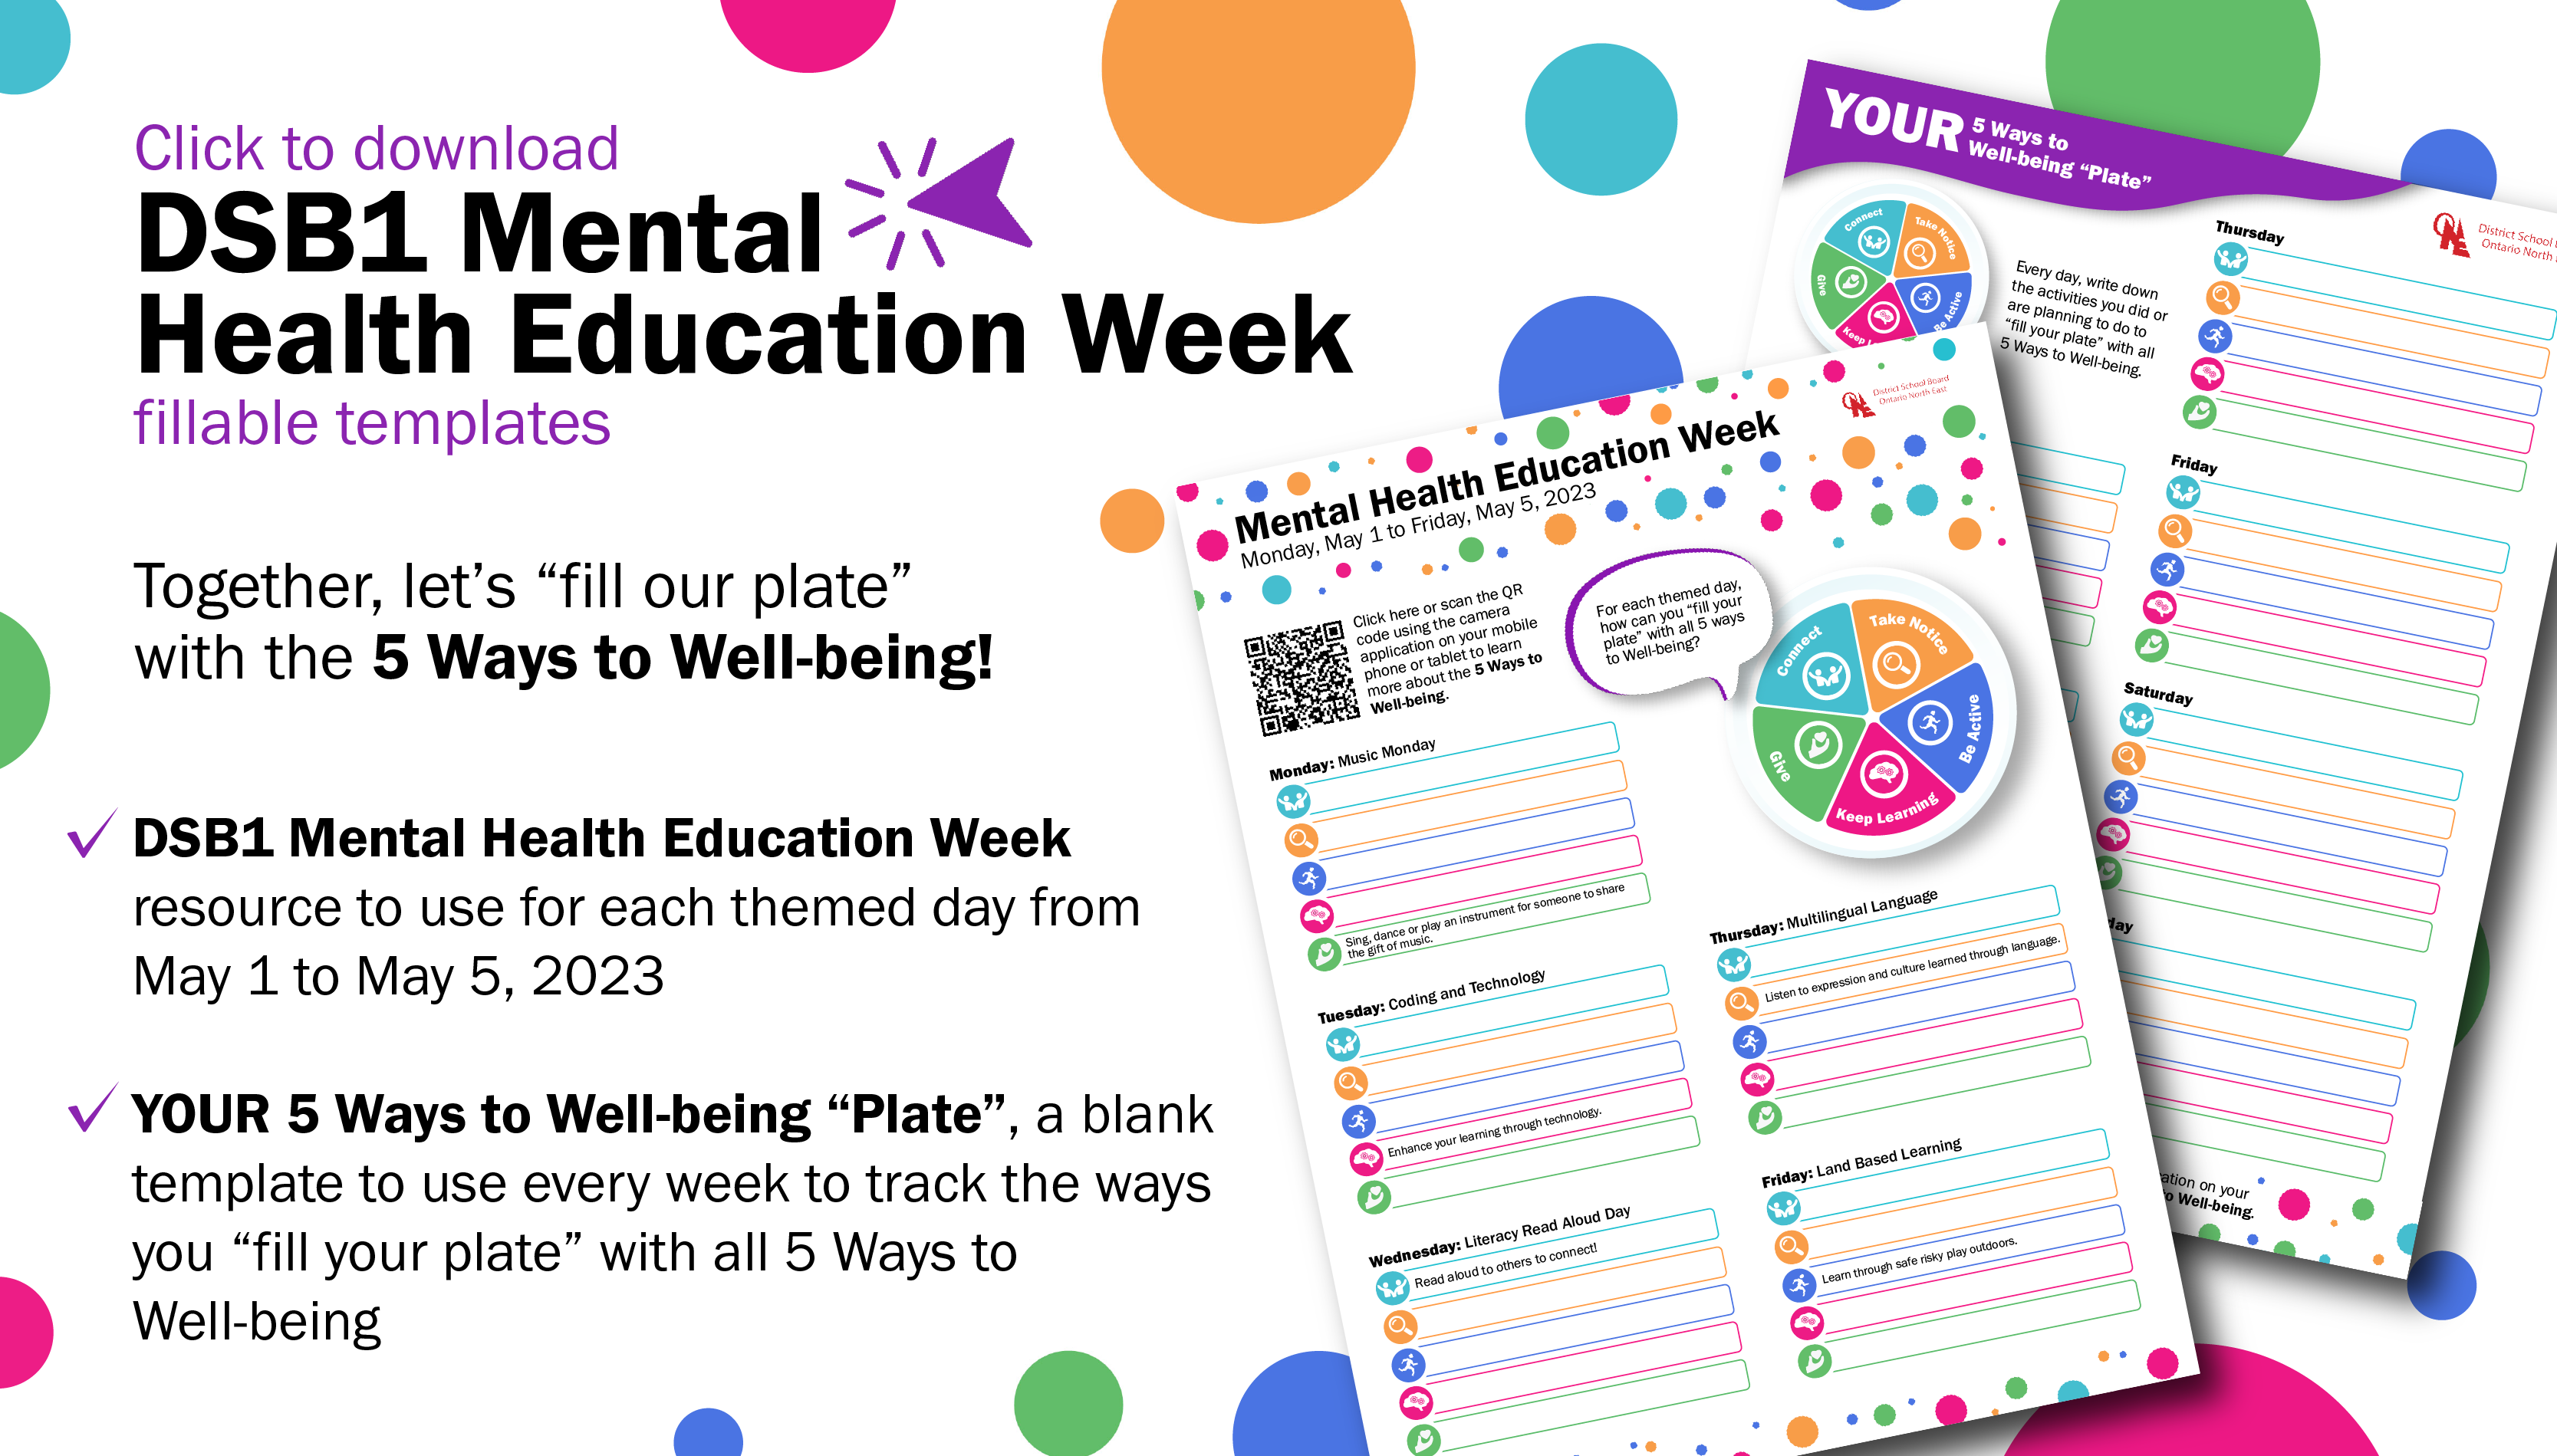 Click to download DSB1 Mental Health Education Week fillable templatesTogether, let’s “fill our plate”  with the 5 Ways to Well-being! DSB1 Mental Health Education Week resource to use for each themed day from May 1 to May 5, 2023  YOUR 5 Ways to Well-being “Plate”, a blank template to use every week to track the ways you “fill your plate” with all 5 Ways to Well-being